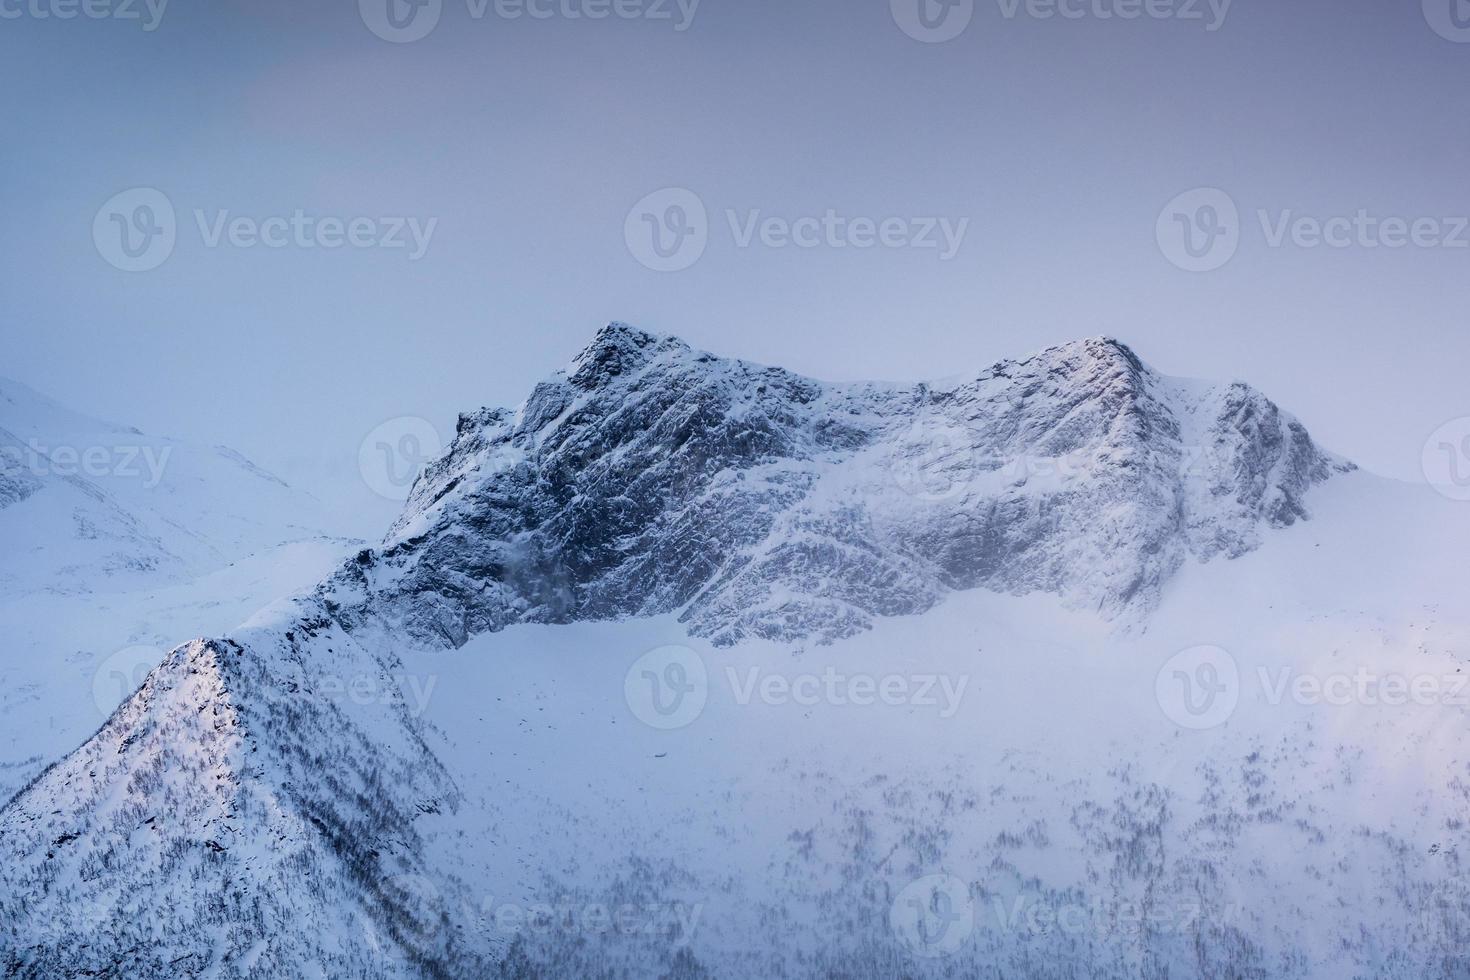 Snowy mountain peak with light in foggy photo